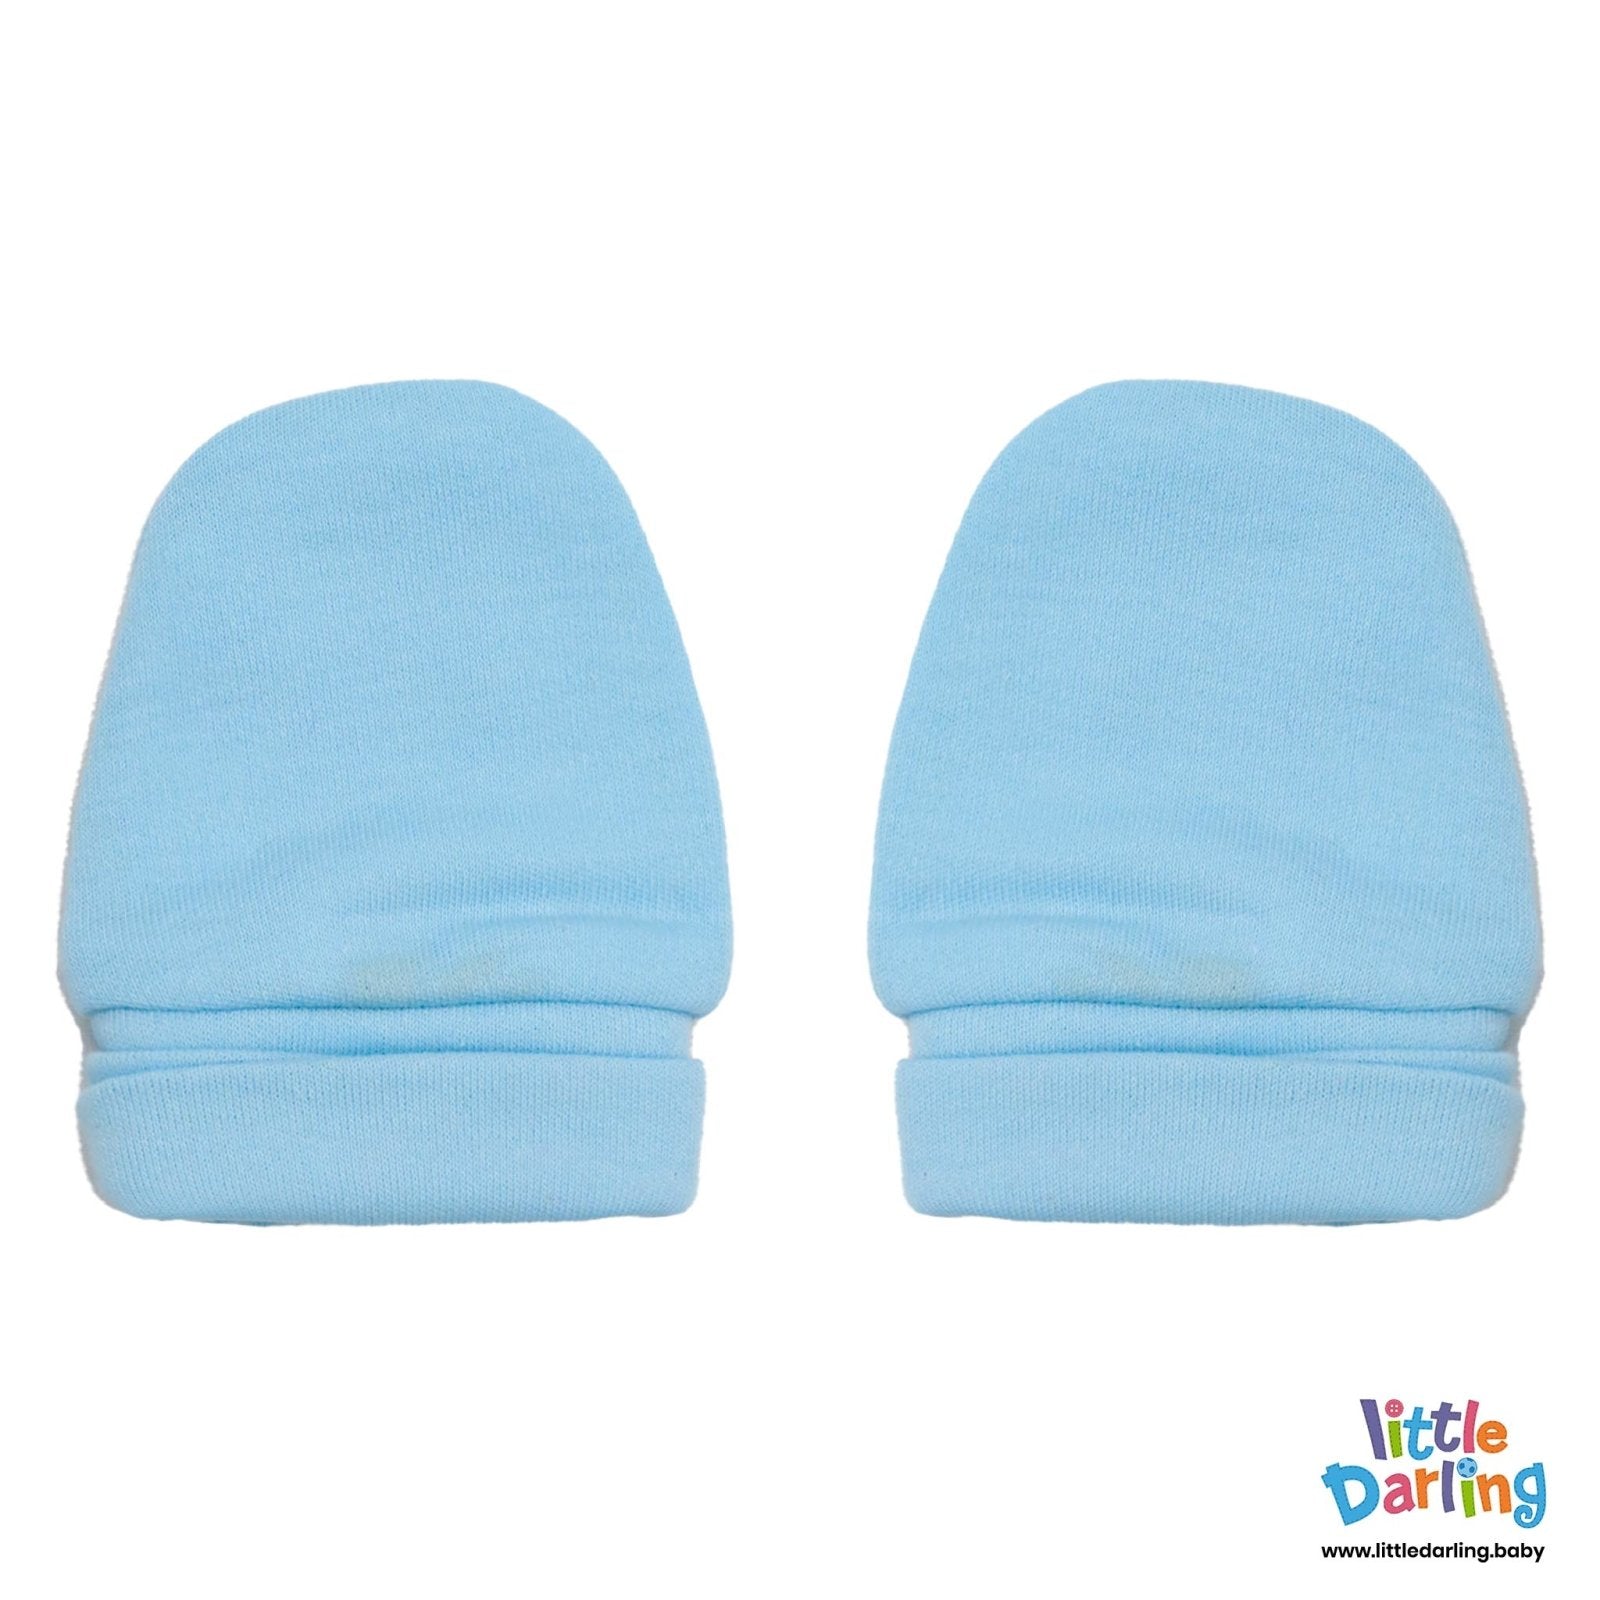 Baby Mittens Pair Pk Of 2 Blue color by Little Darling